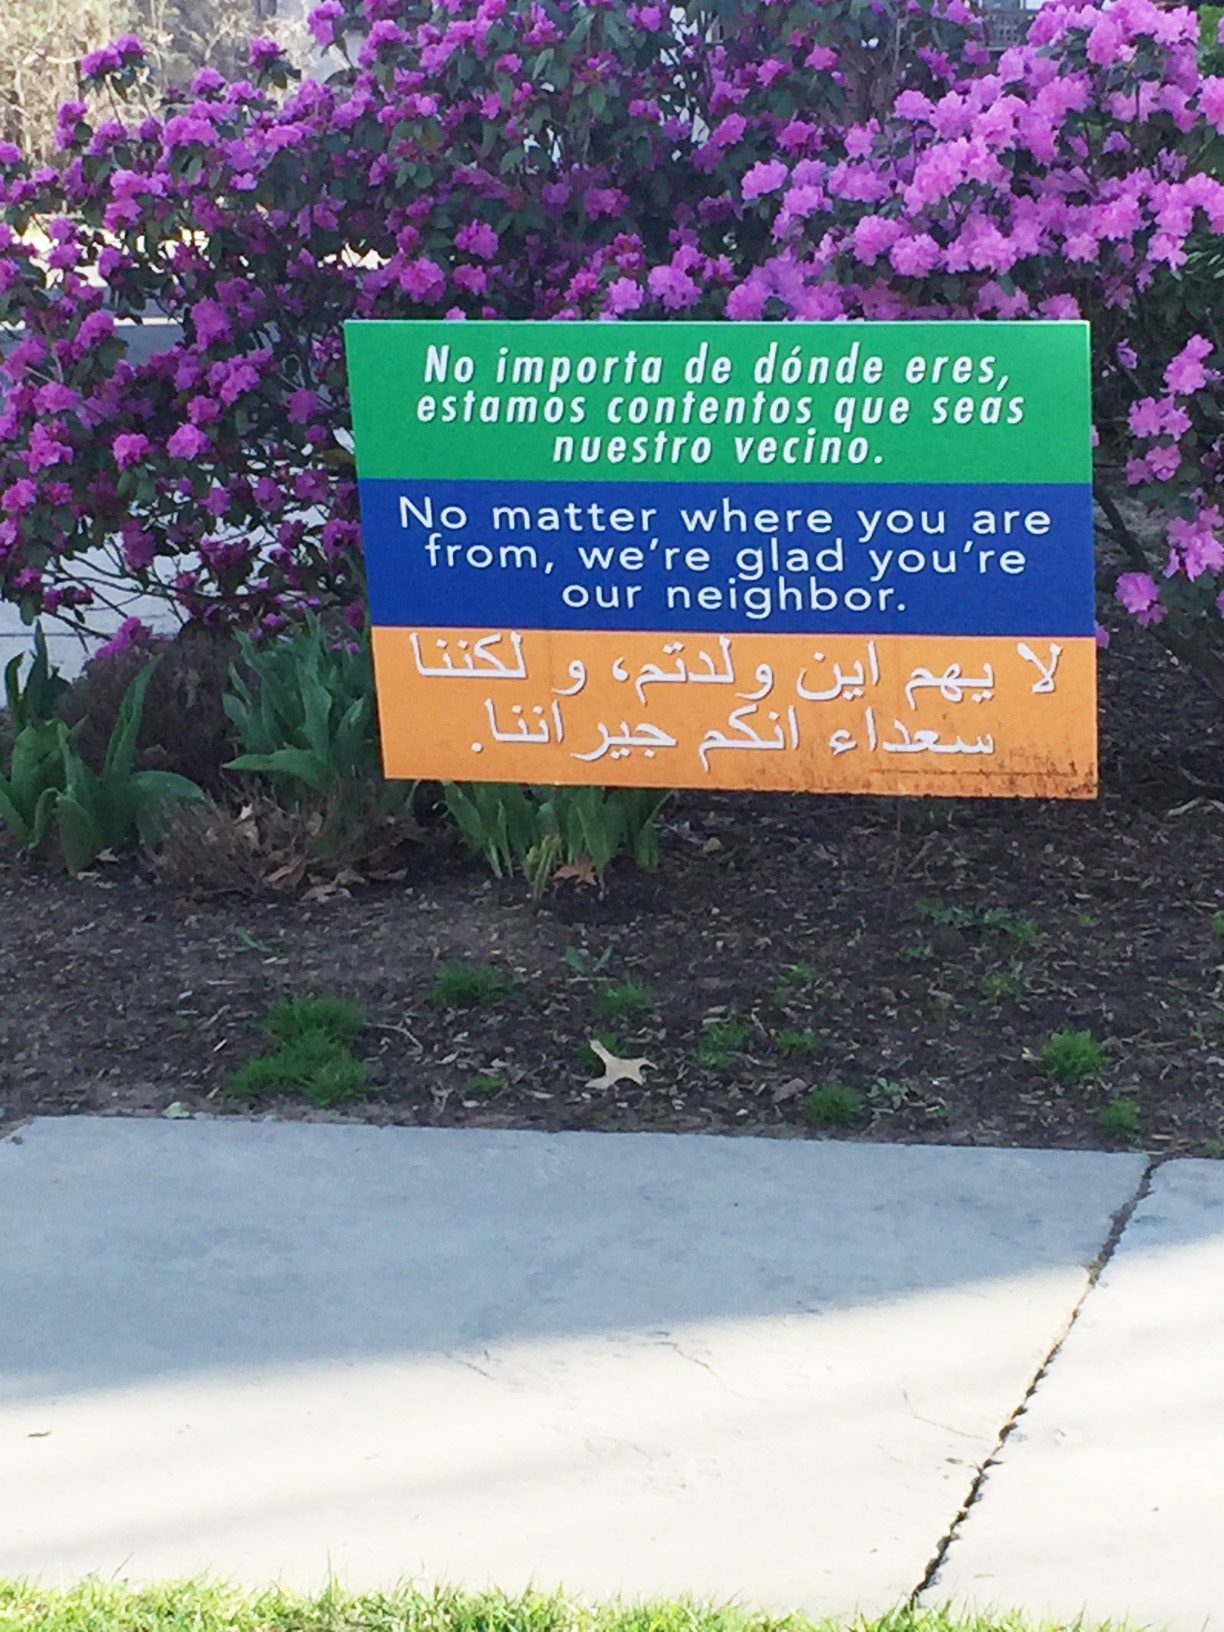 Lawn sign in three languages: We're glad you're our neighbor